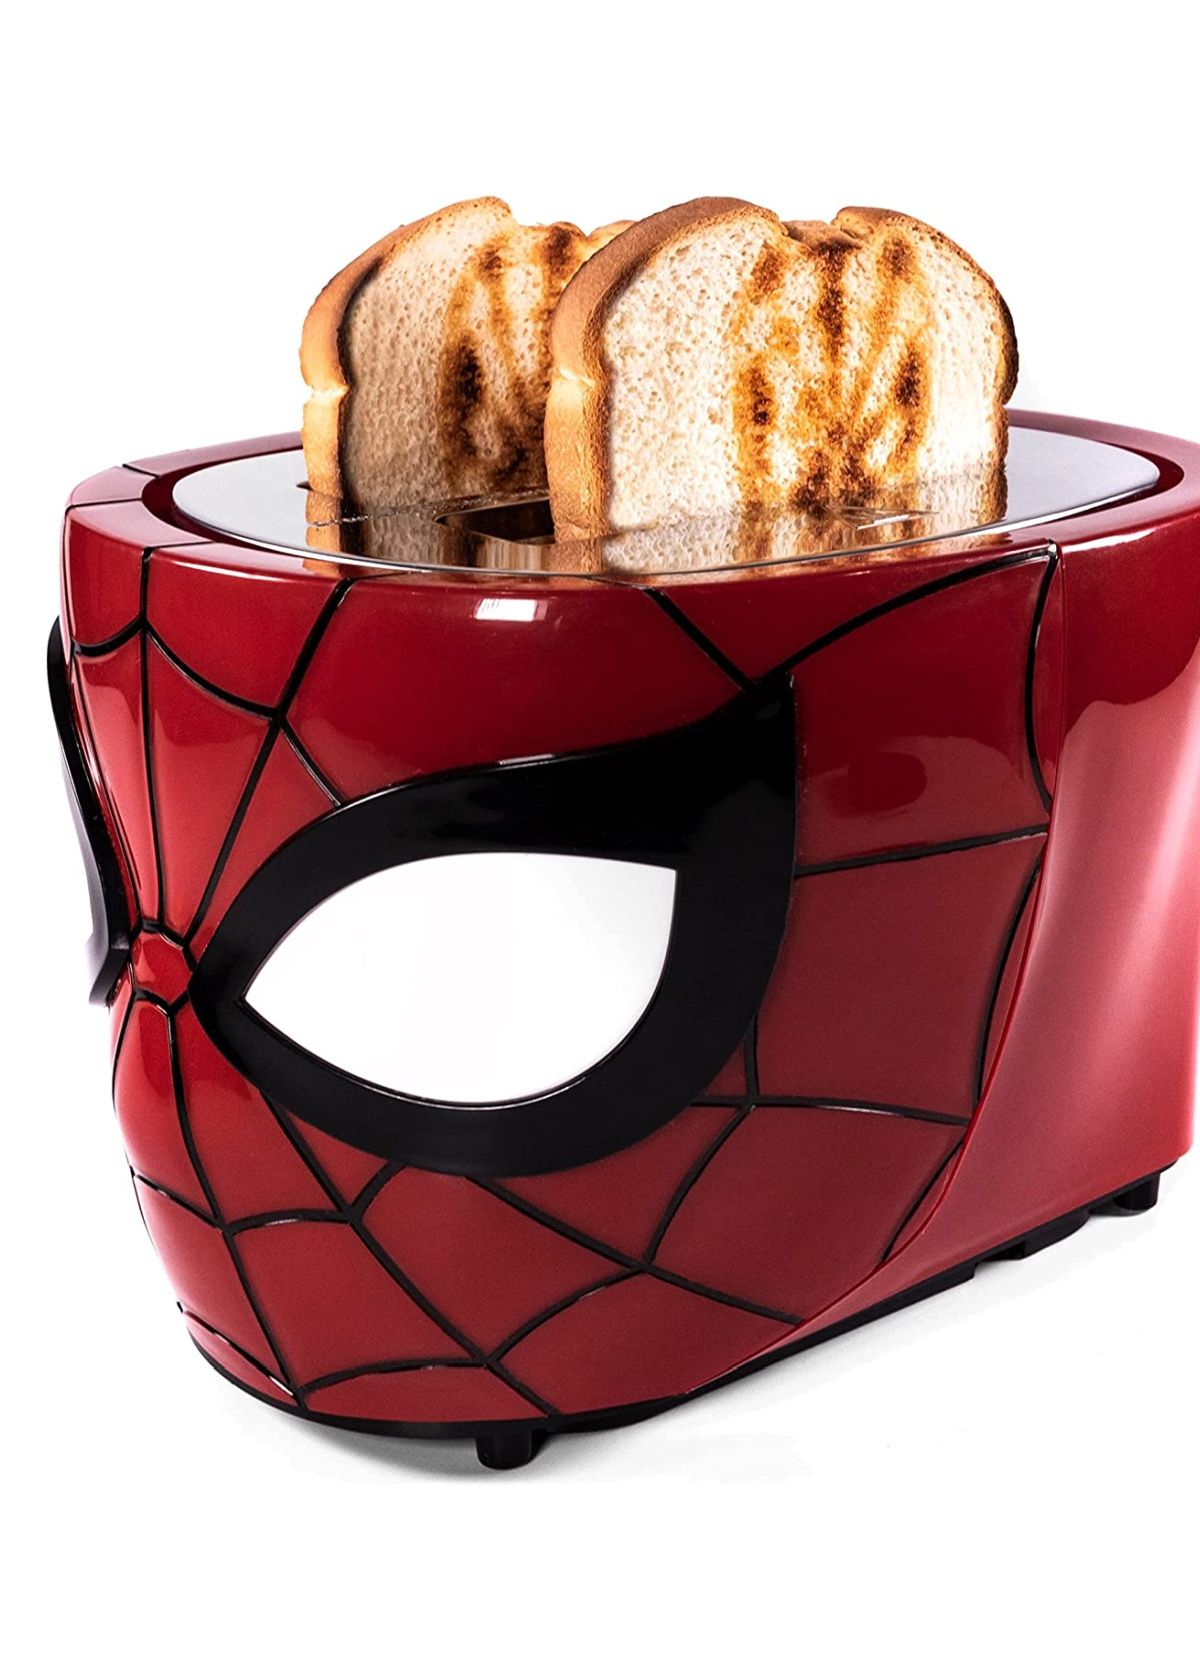 Get Ready For Your Adventures With These Coolest Toasters